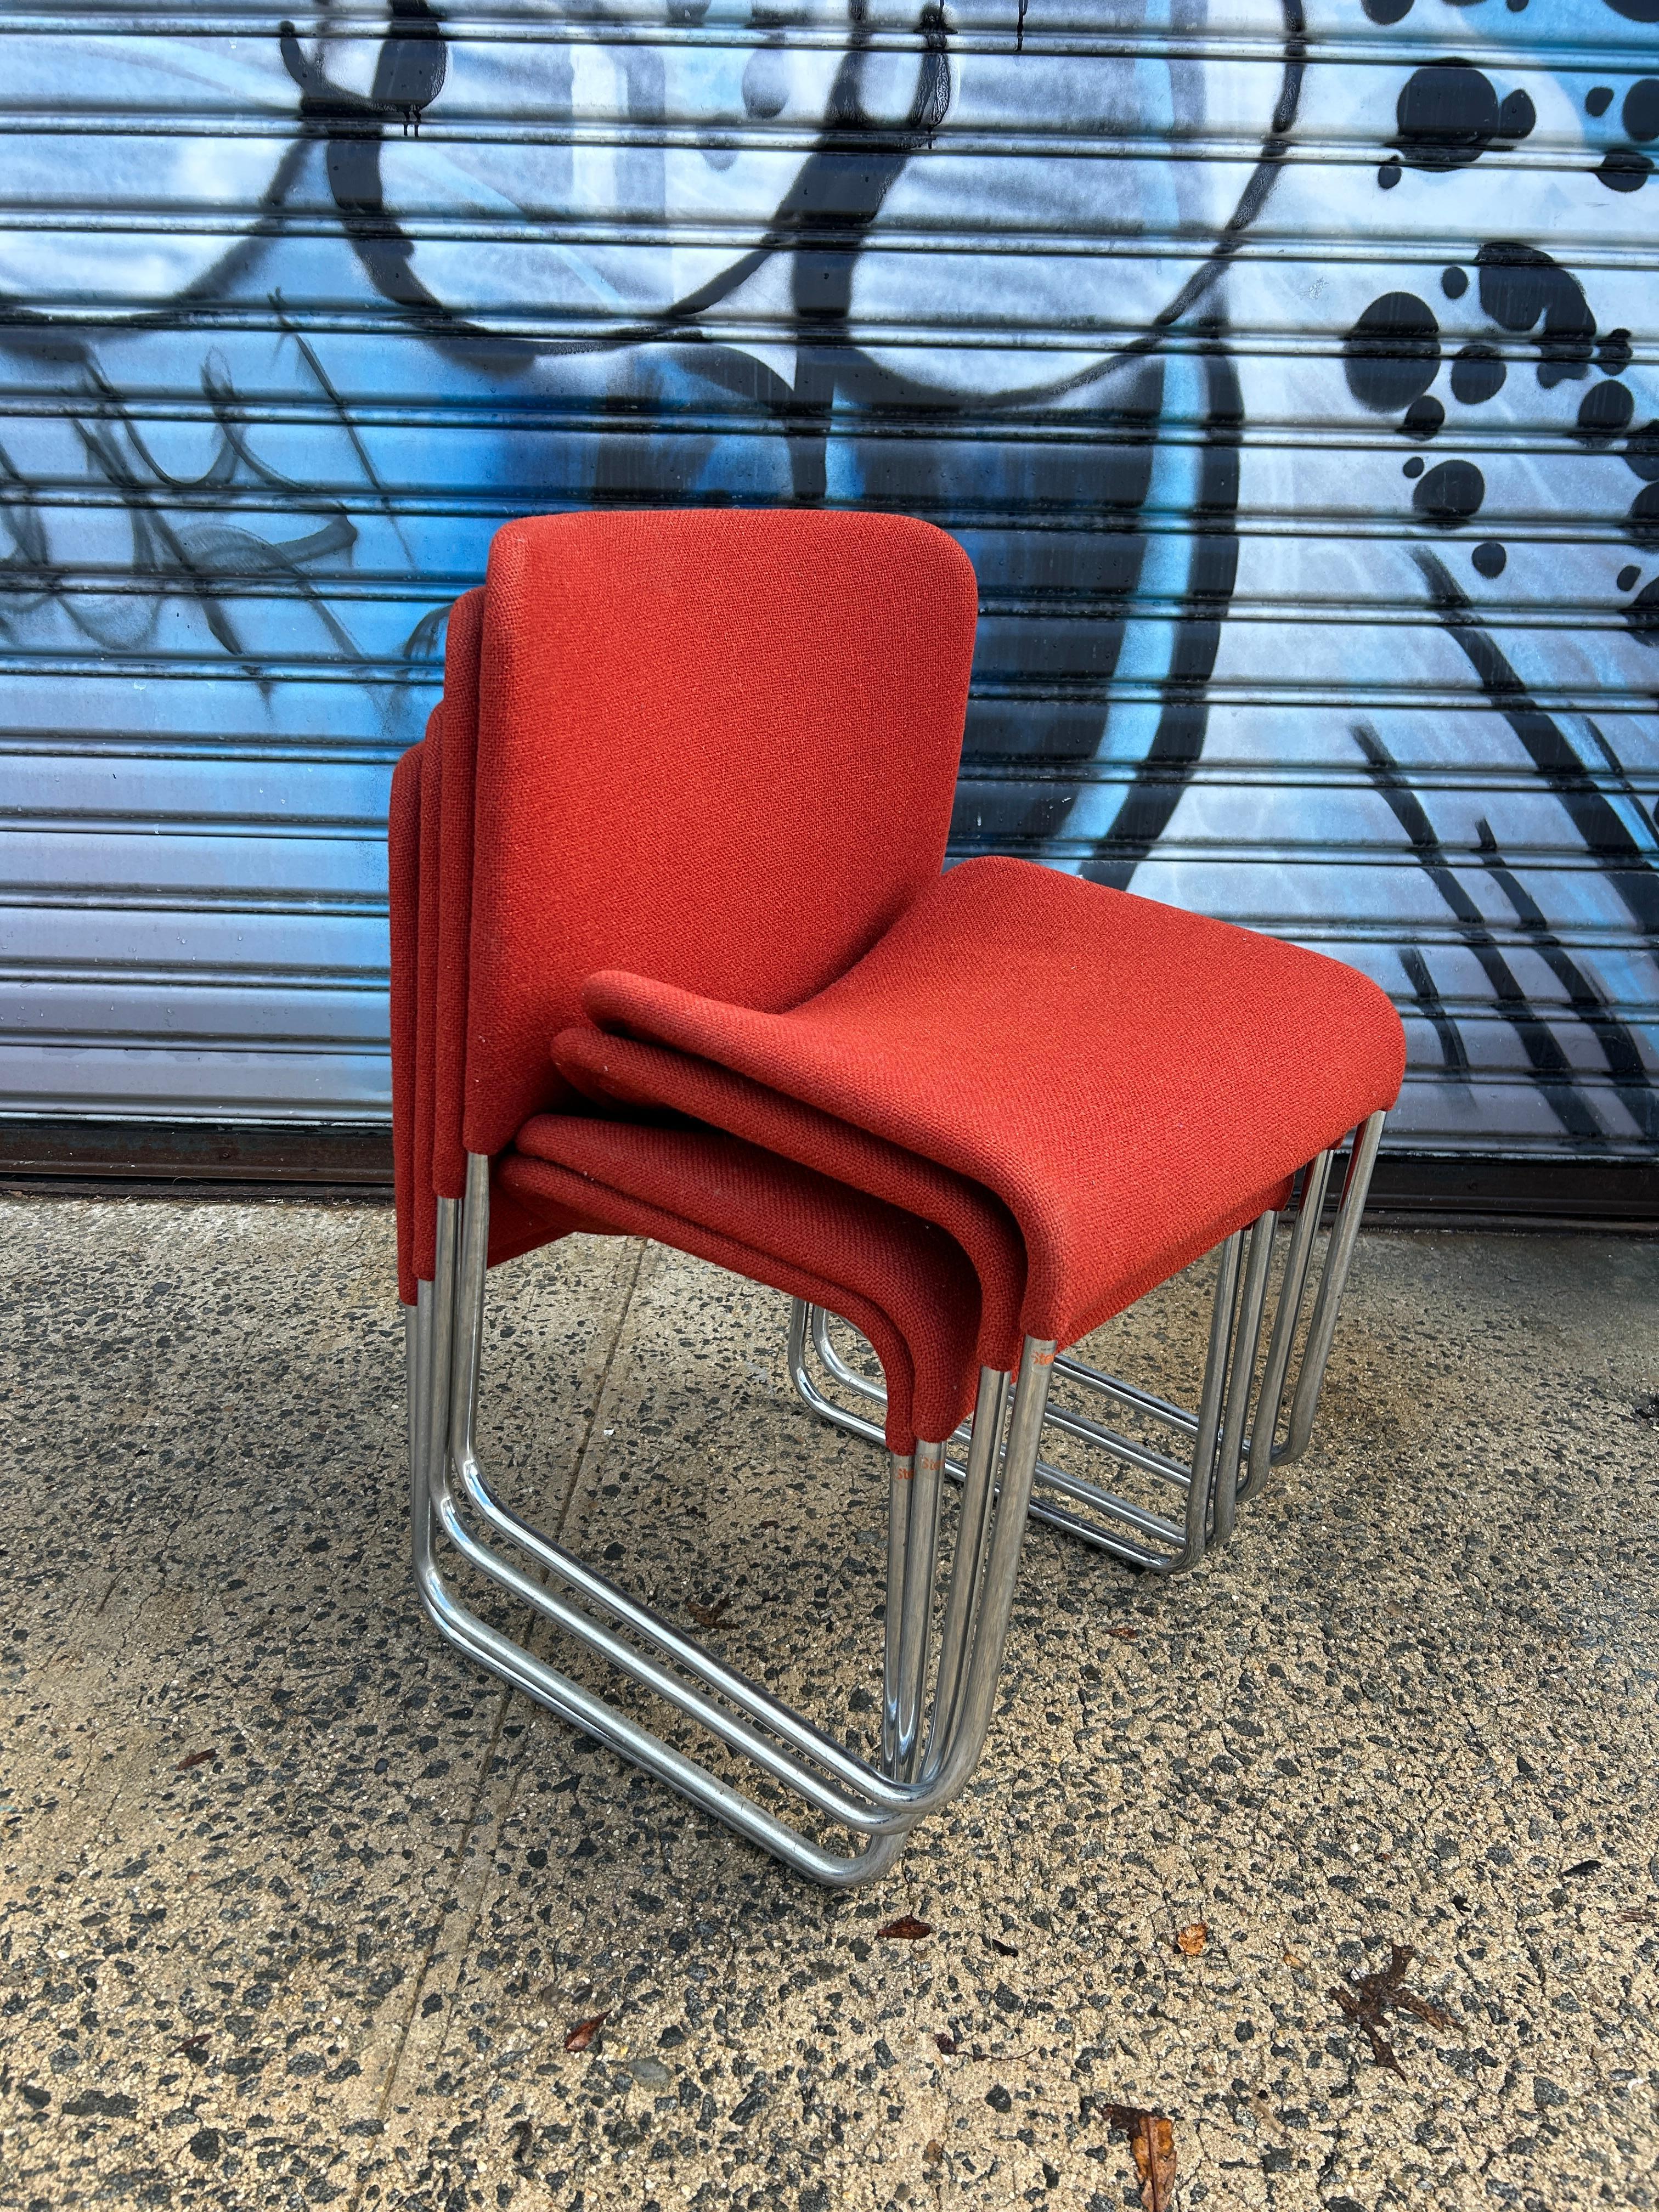 Rare Set of (4) Ecco chrome tube red woven wool Stackable chairs by Møre Design team. Dining chair 